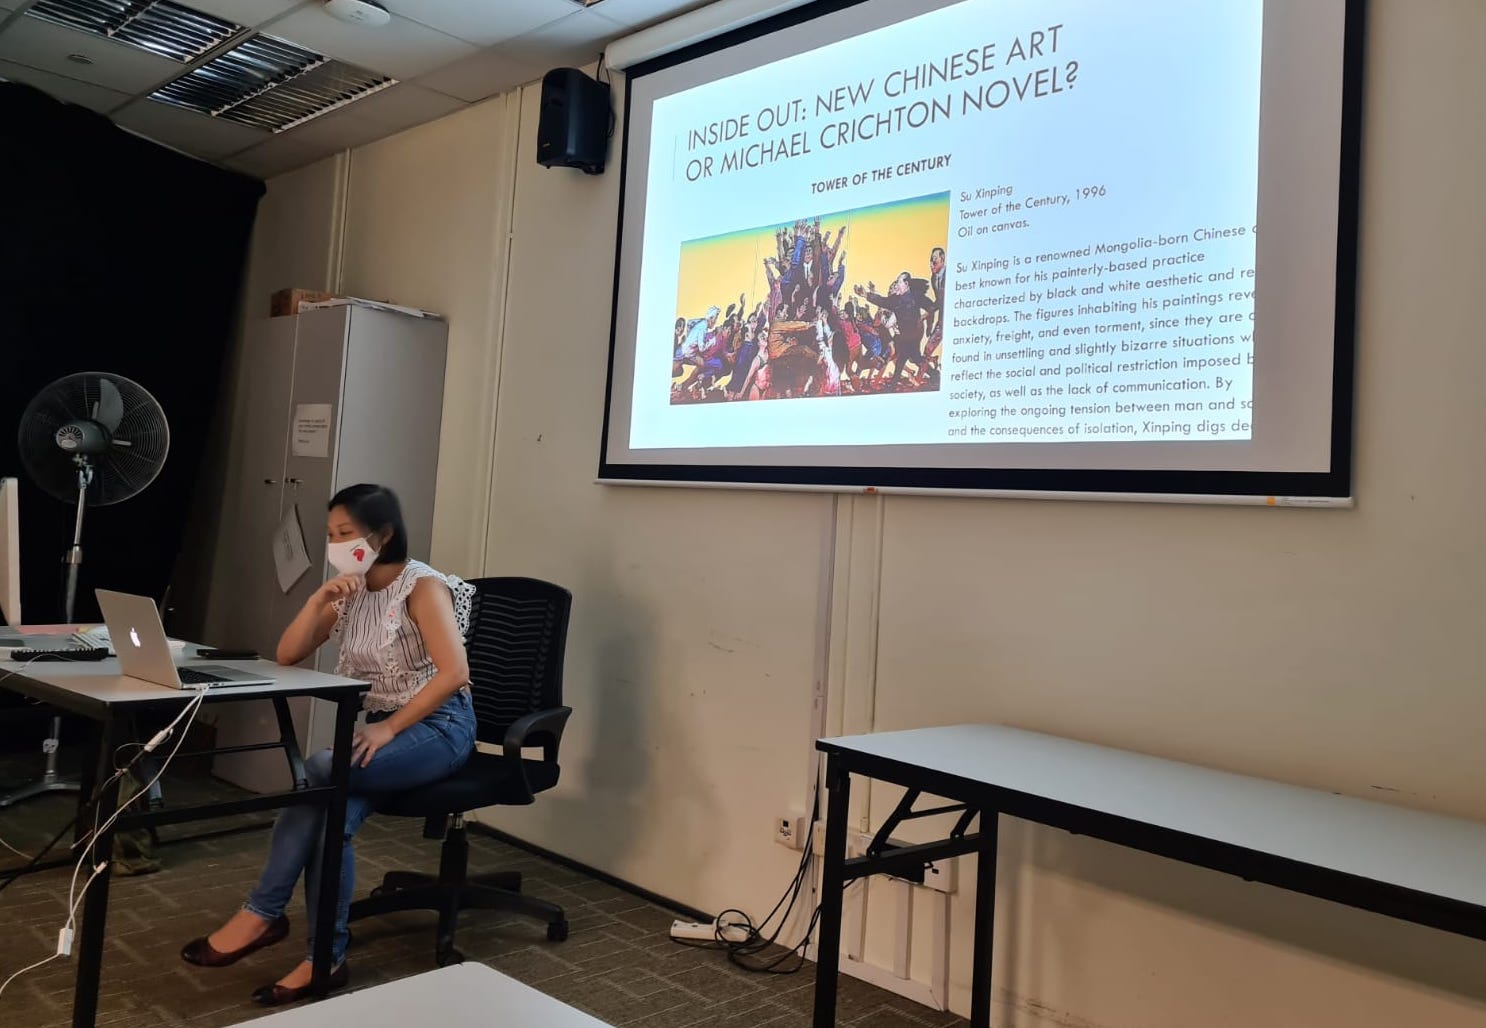 Vanessa doing a class presentation on Chinese art during her studies.